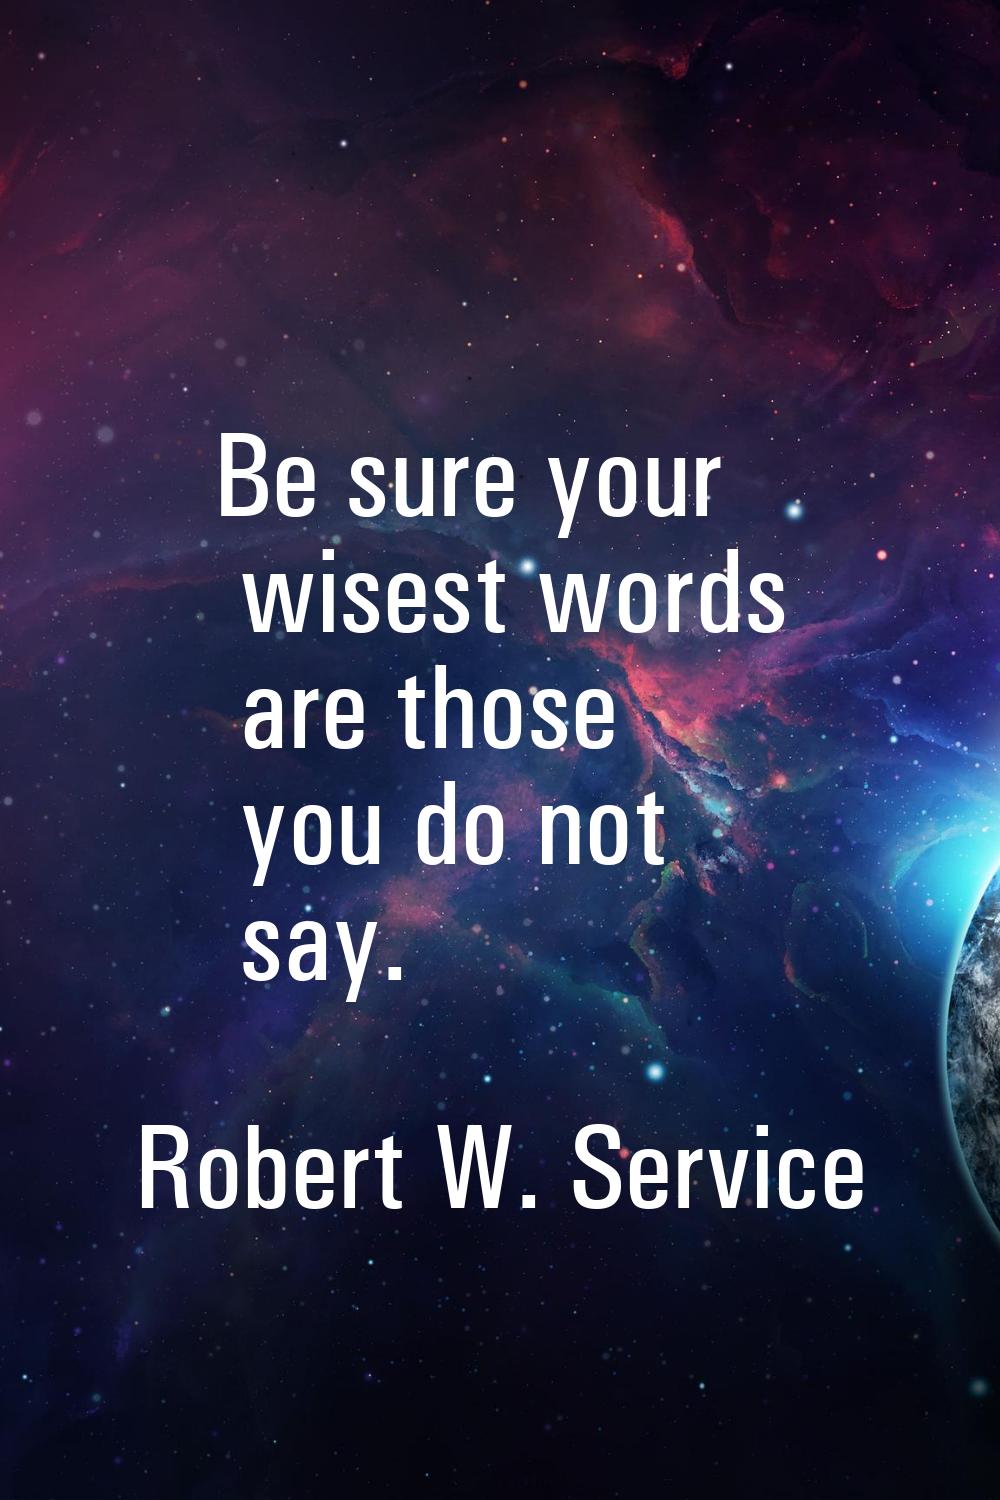 Be sure your wisest words are those you do not say.